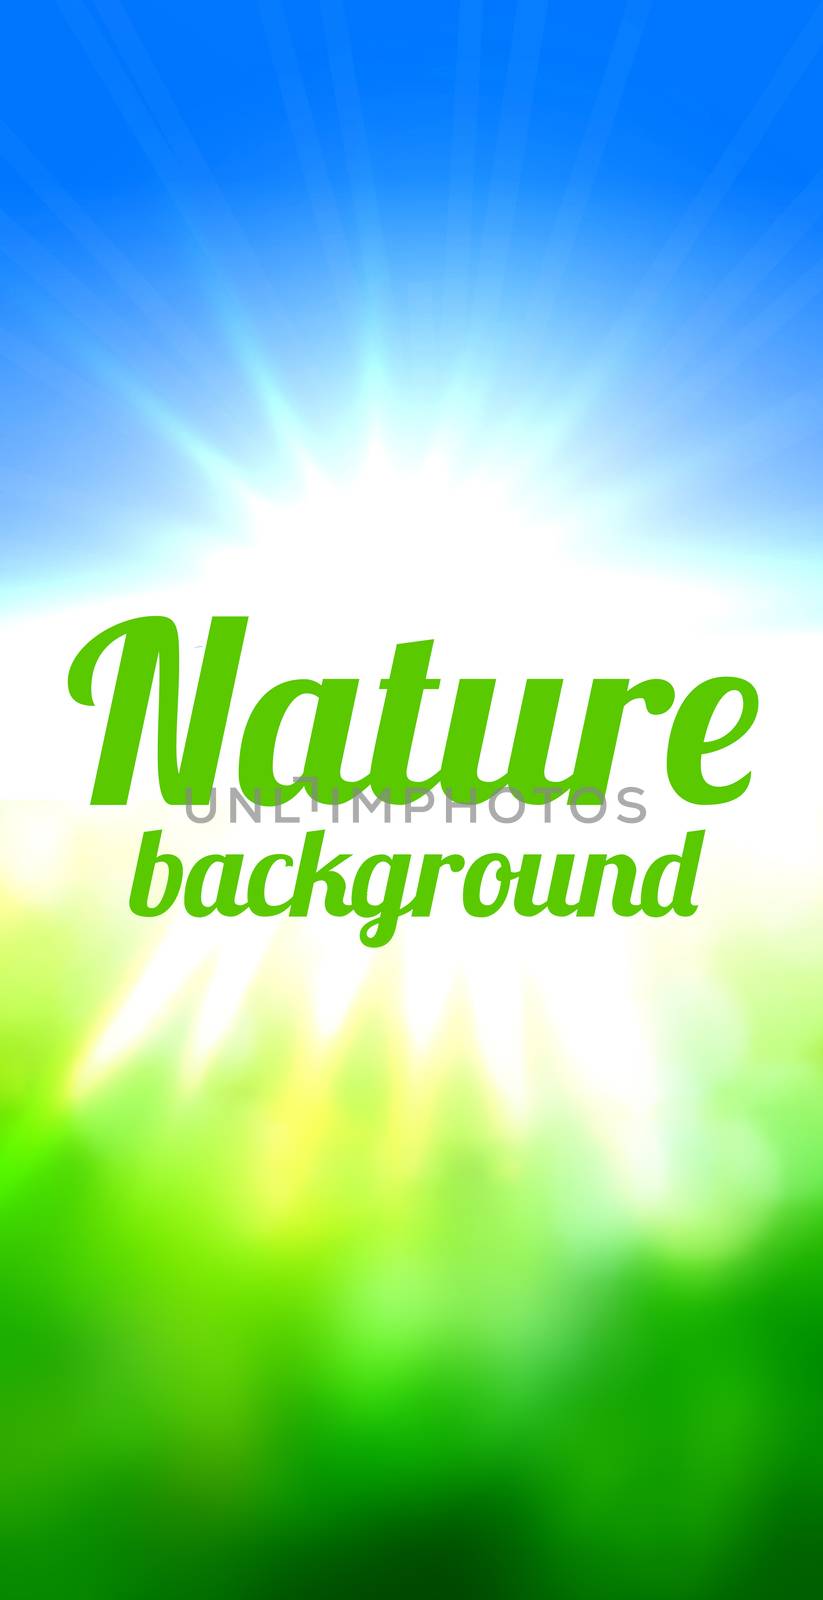 Nature background  with sun and green field